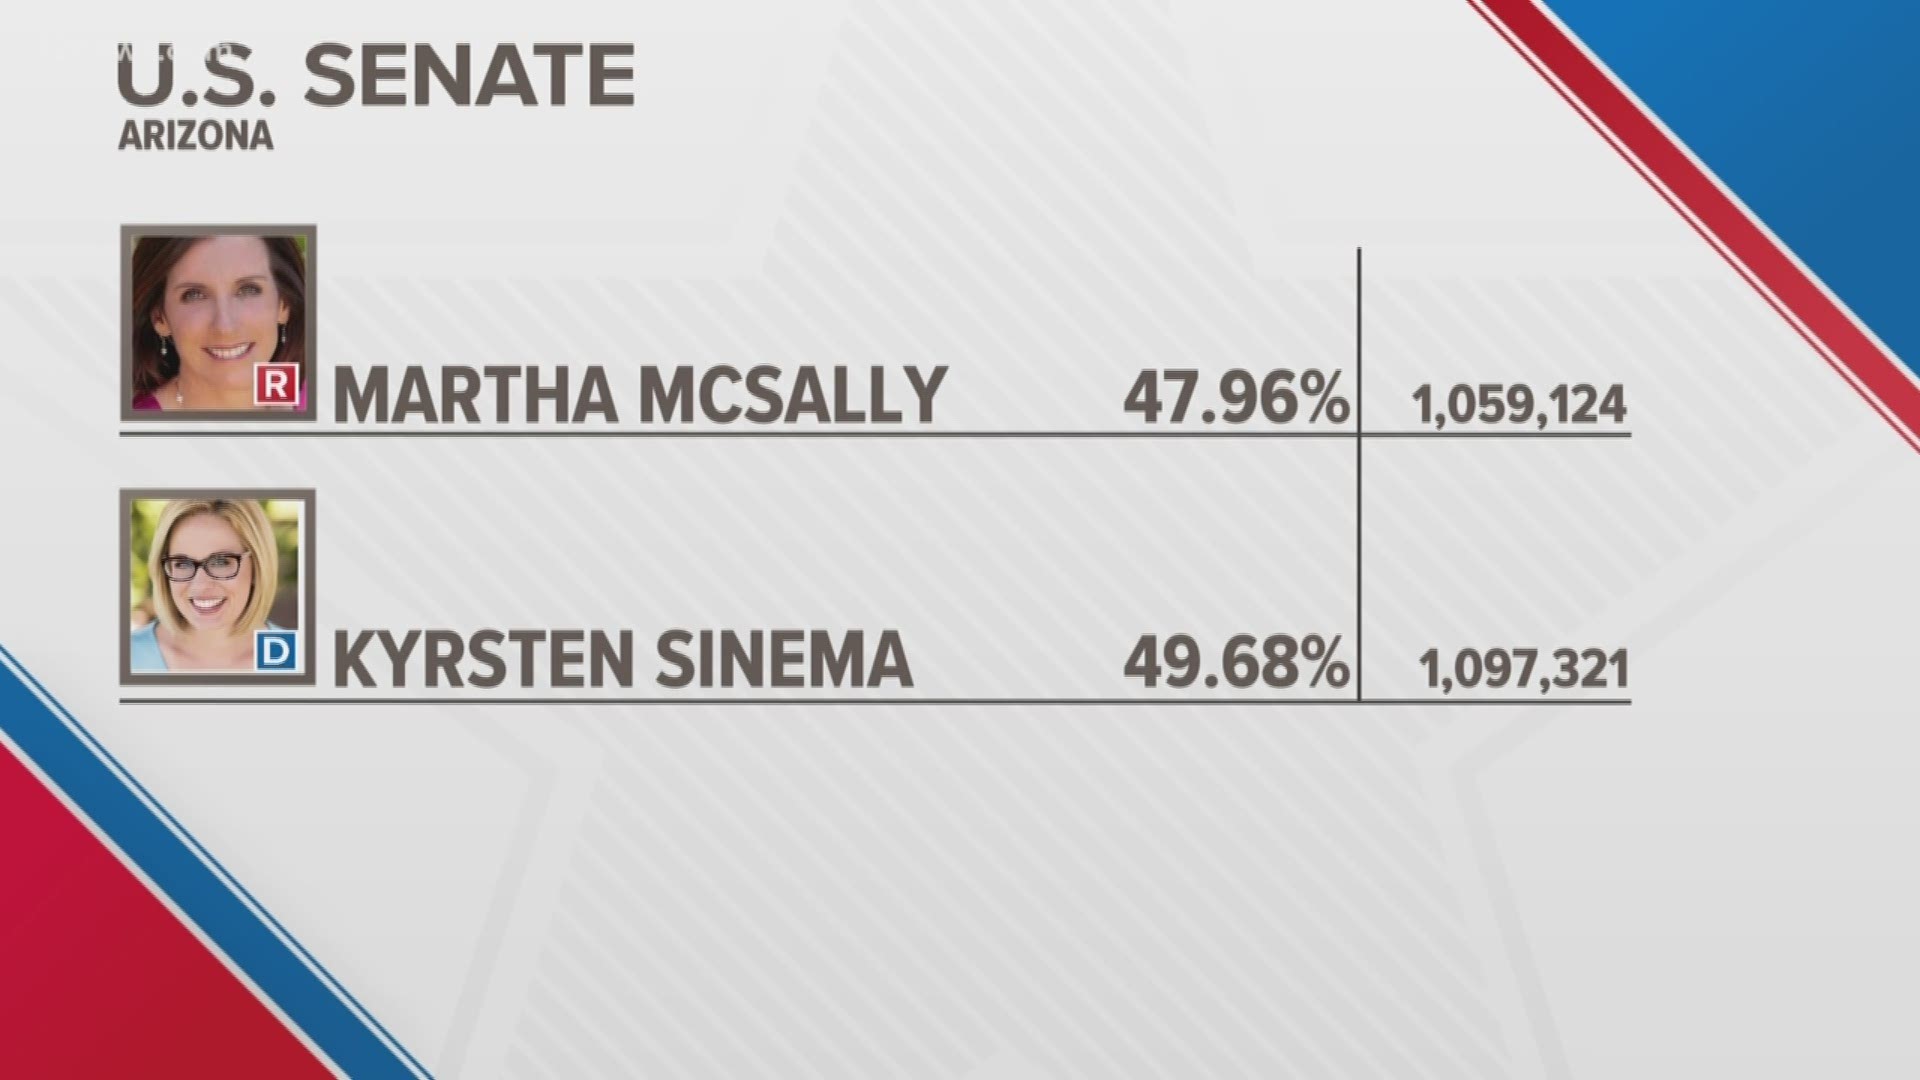 Kyrsten Sinema has increased her lead over Martha McSally by about 38,000 votes in the latest tally of ballots. Katie Hobbs has also increased her lead for Secretary of State.